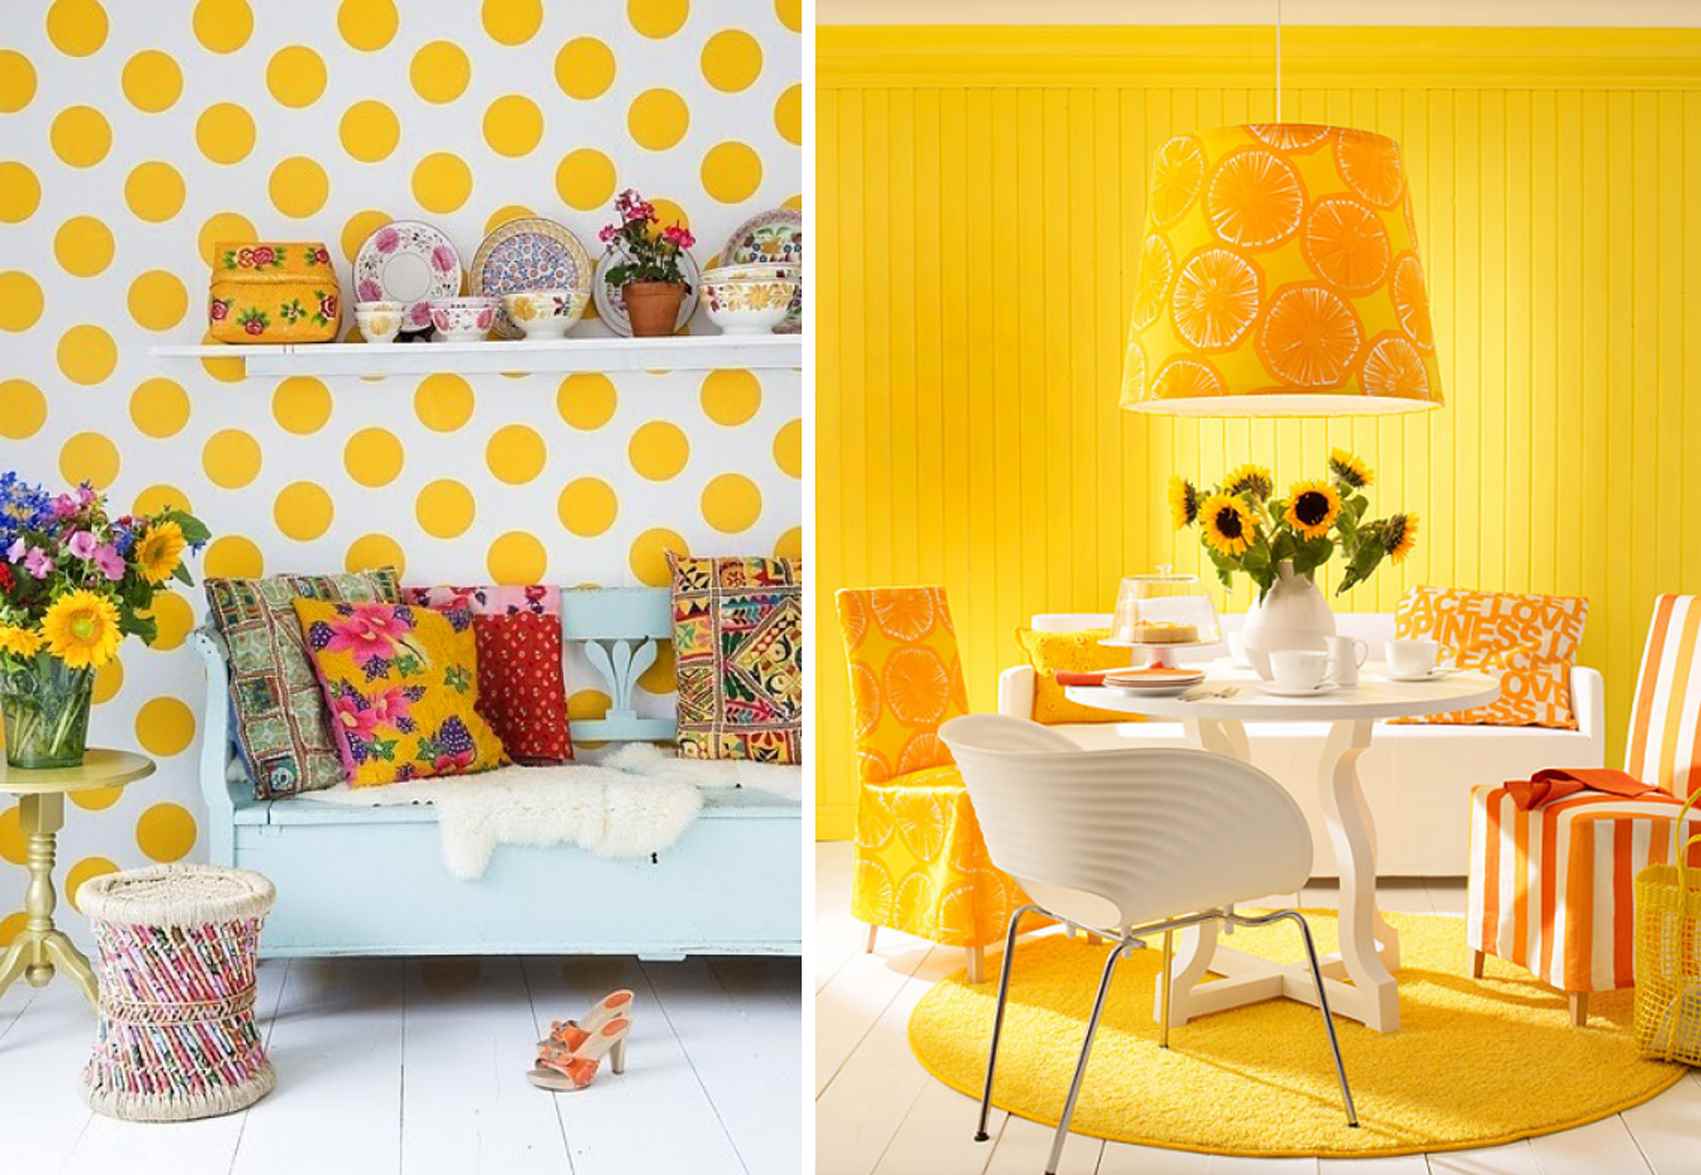 an example of using light yellow in the interior of a room